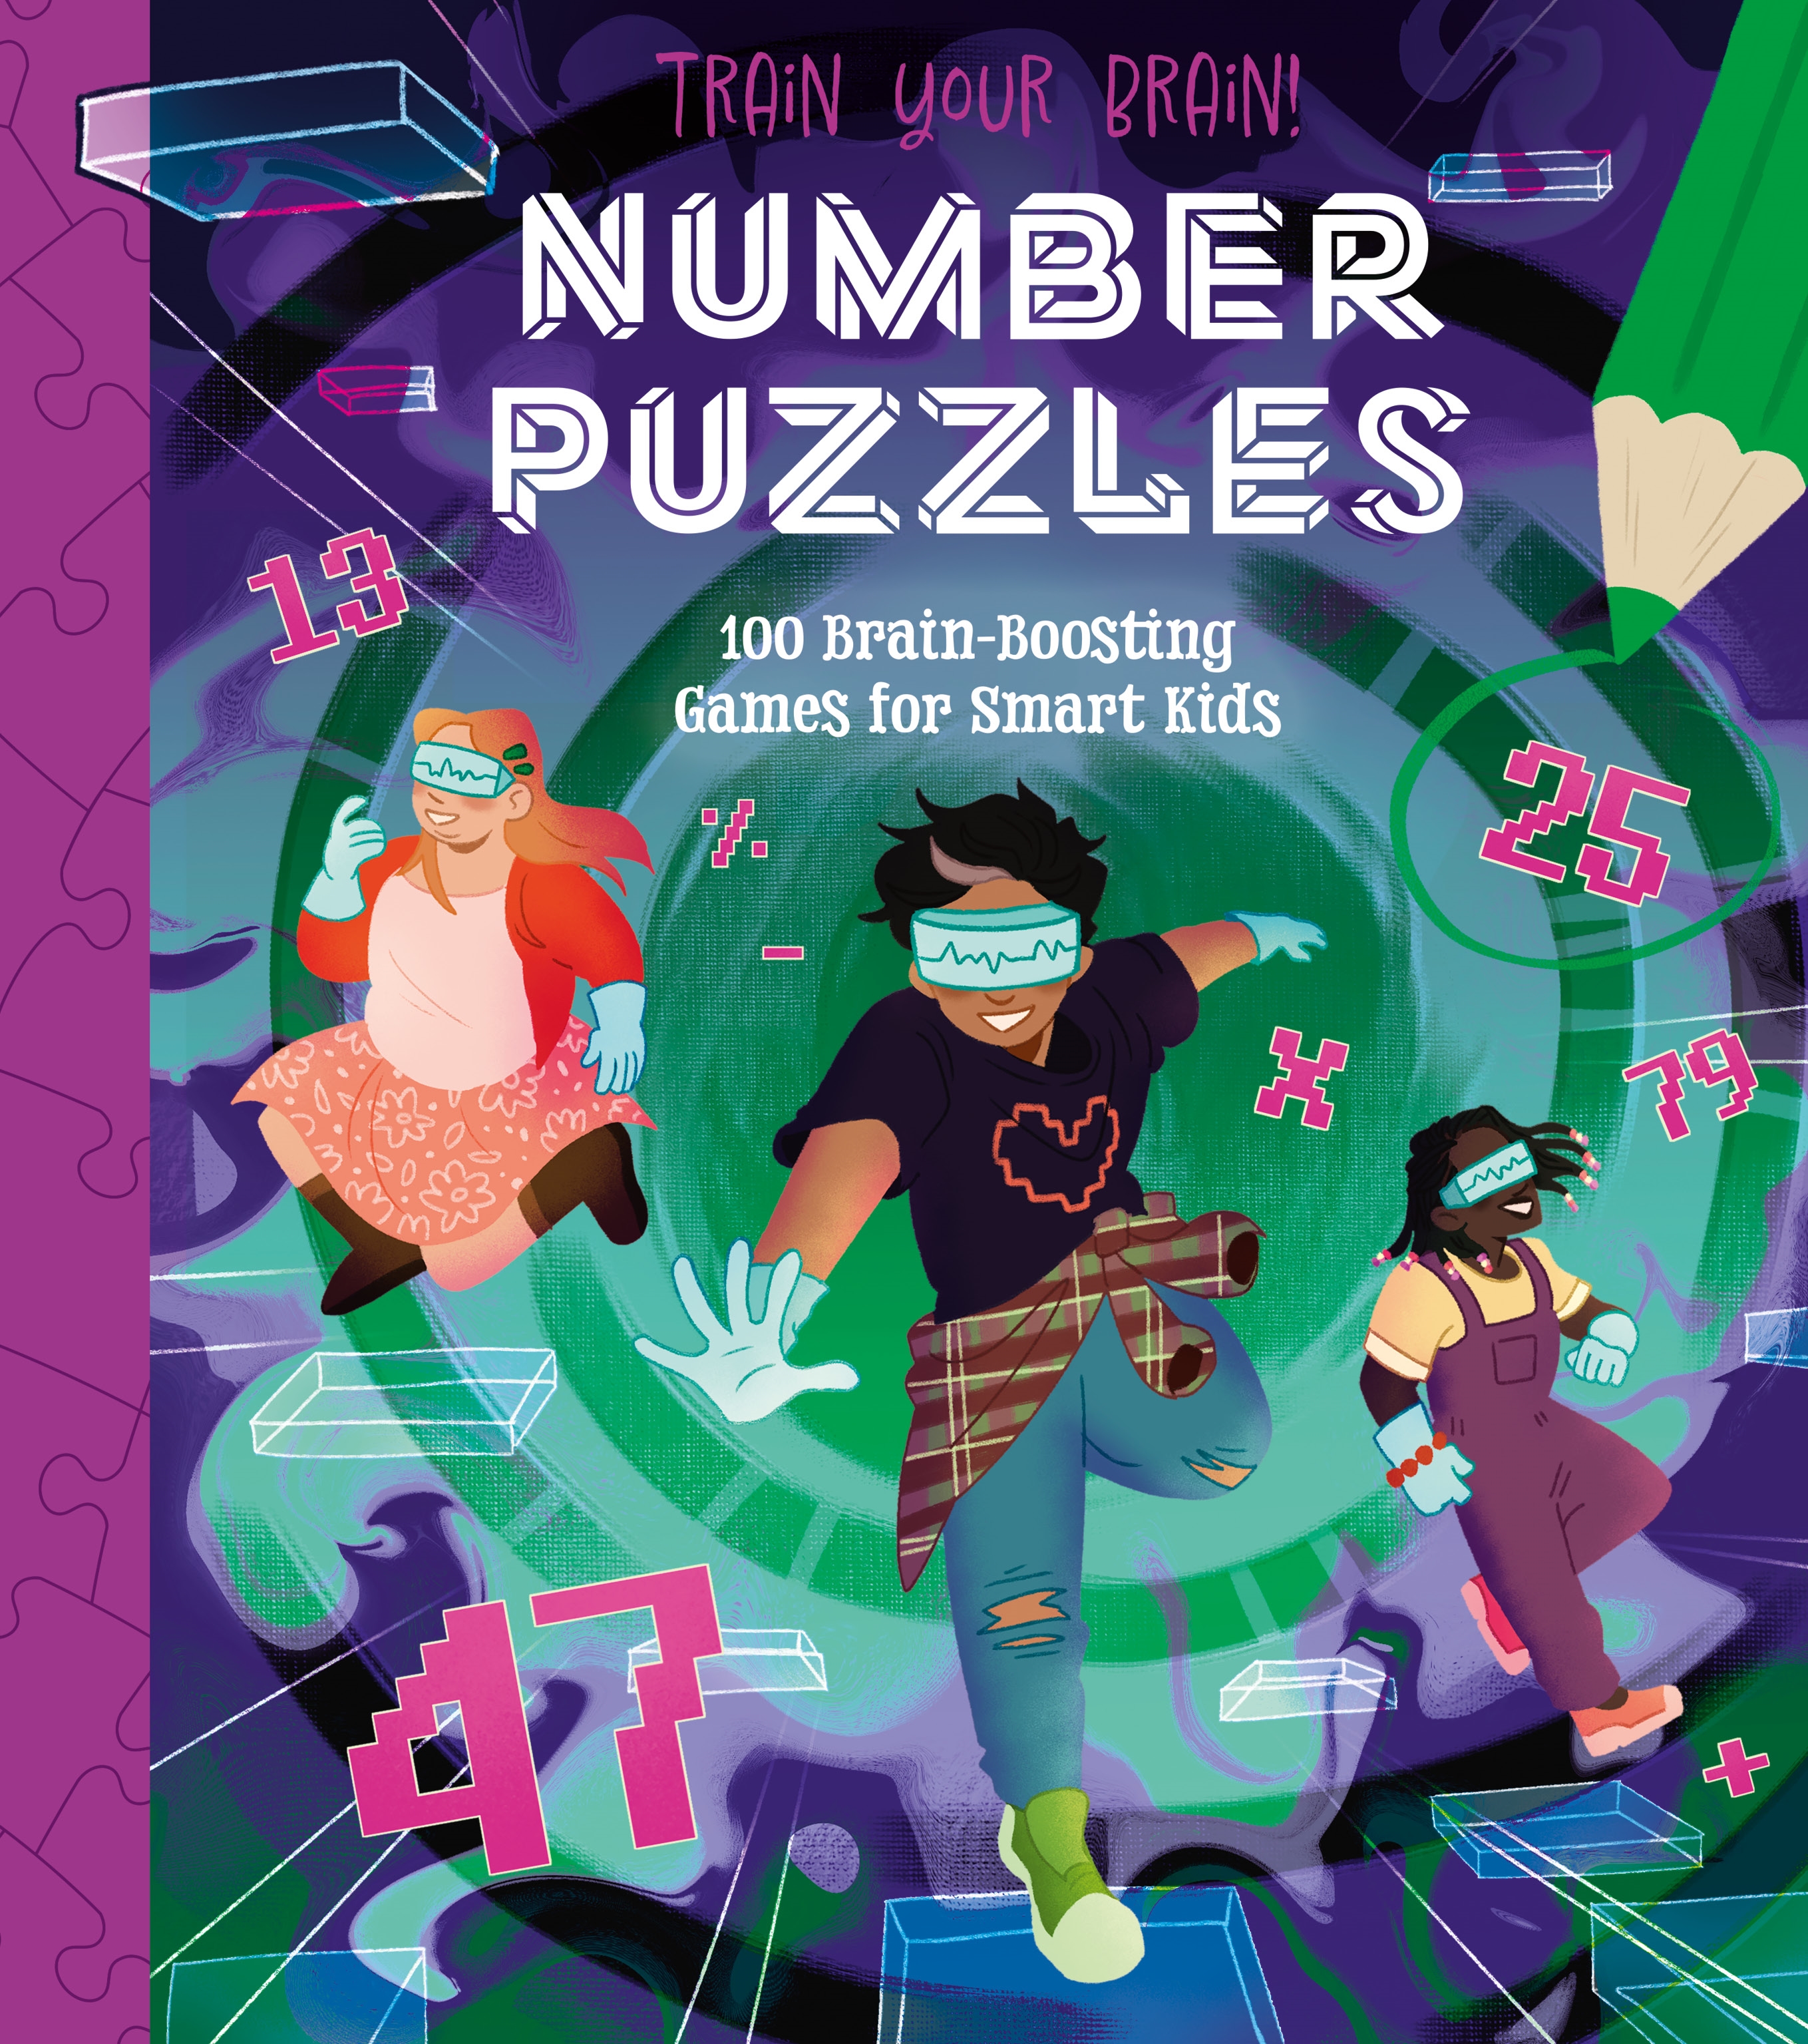 Train Your Brain! Number Puzzles